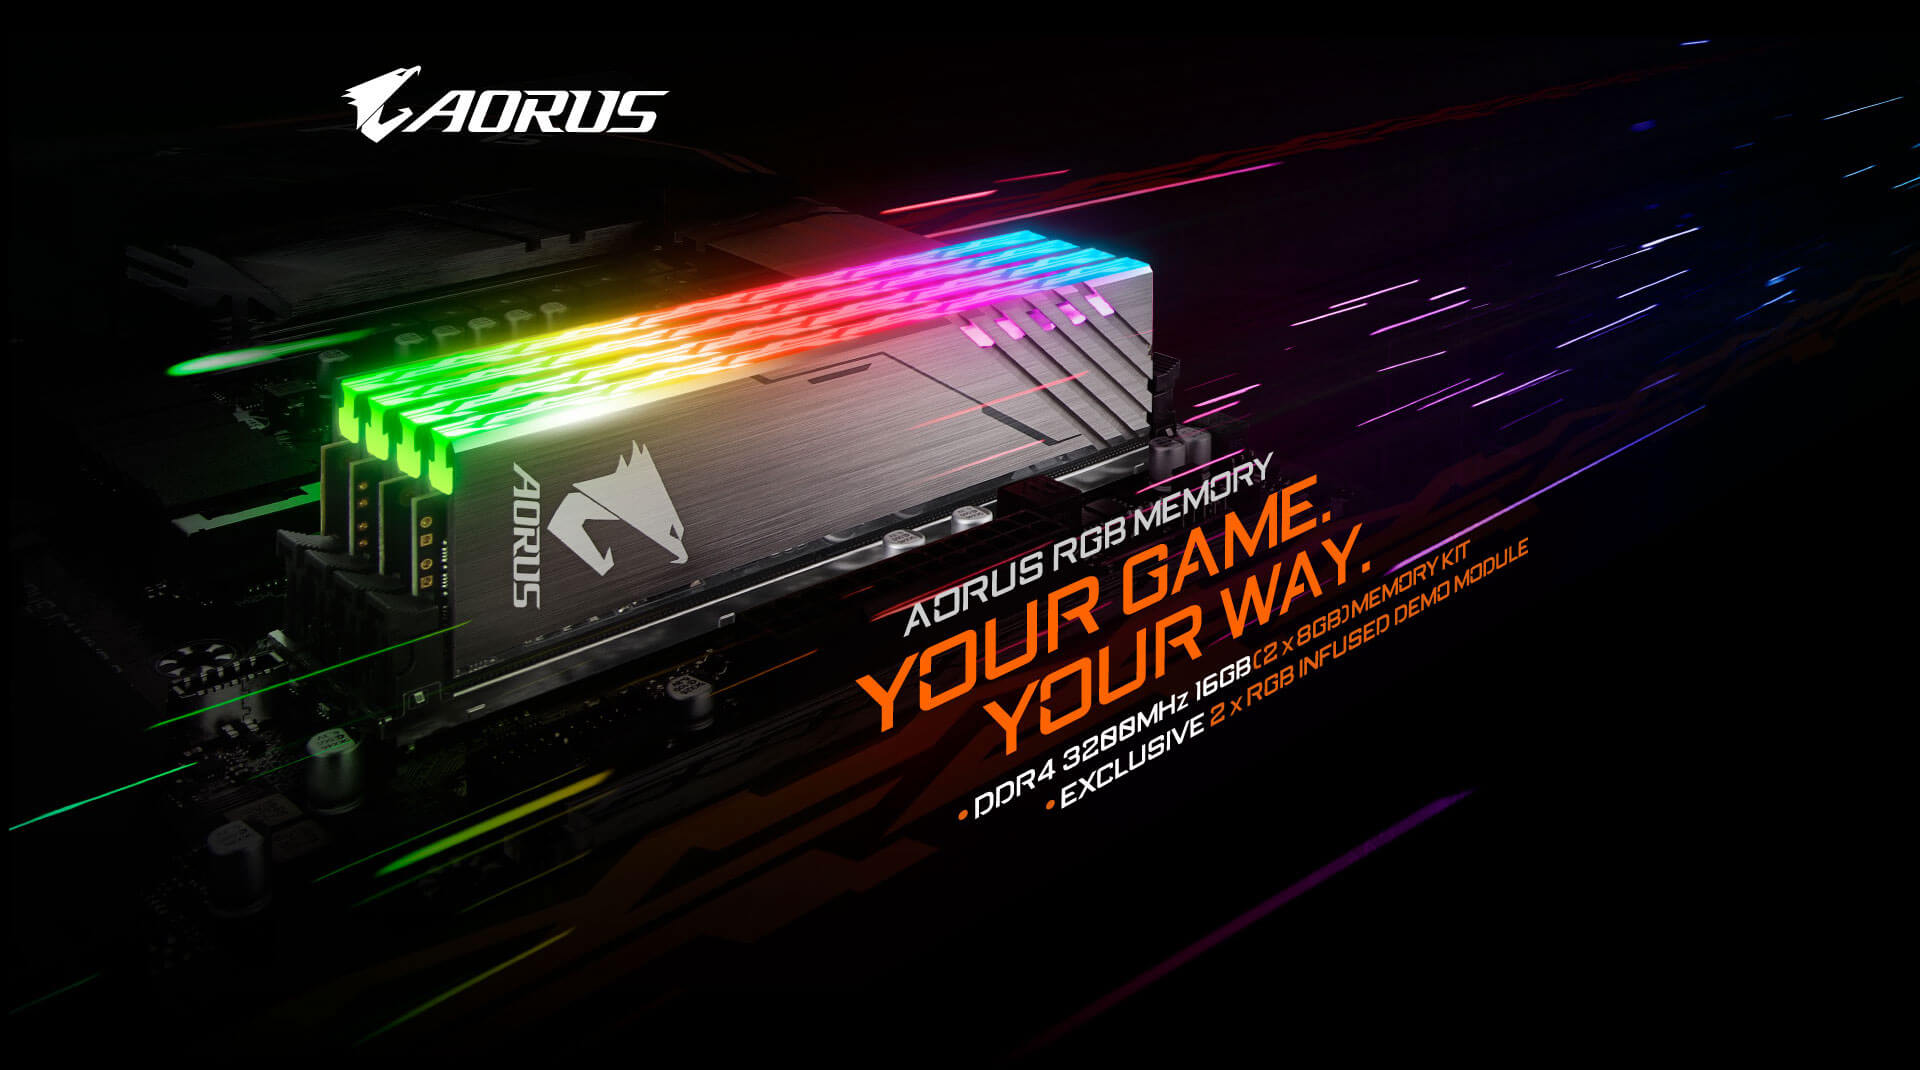 AORUS Memory 16GB 3200MHz (With Demo Kit)(Limited Edition) Key Features | Memory - GIGABYTE Global